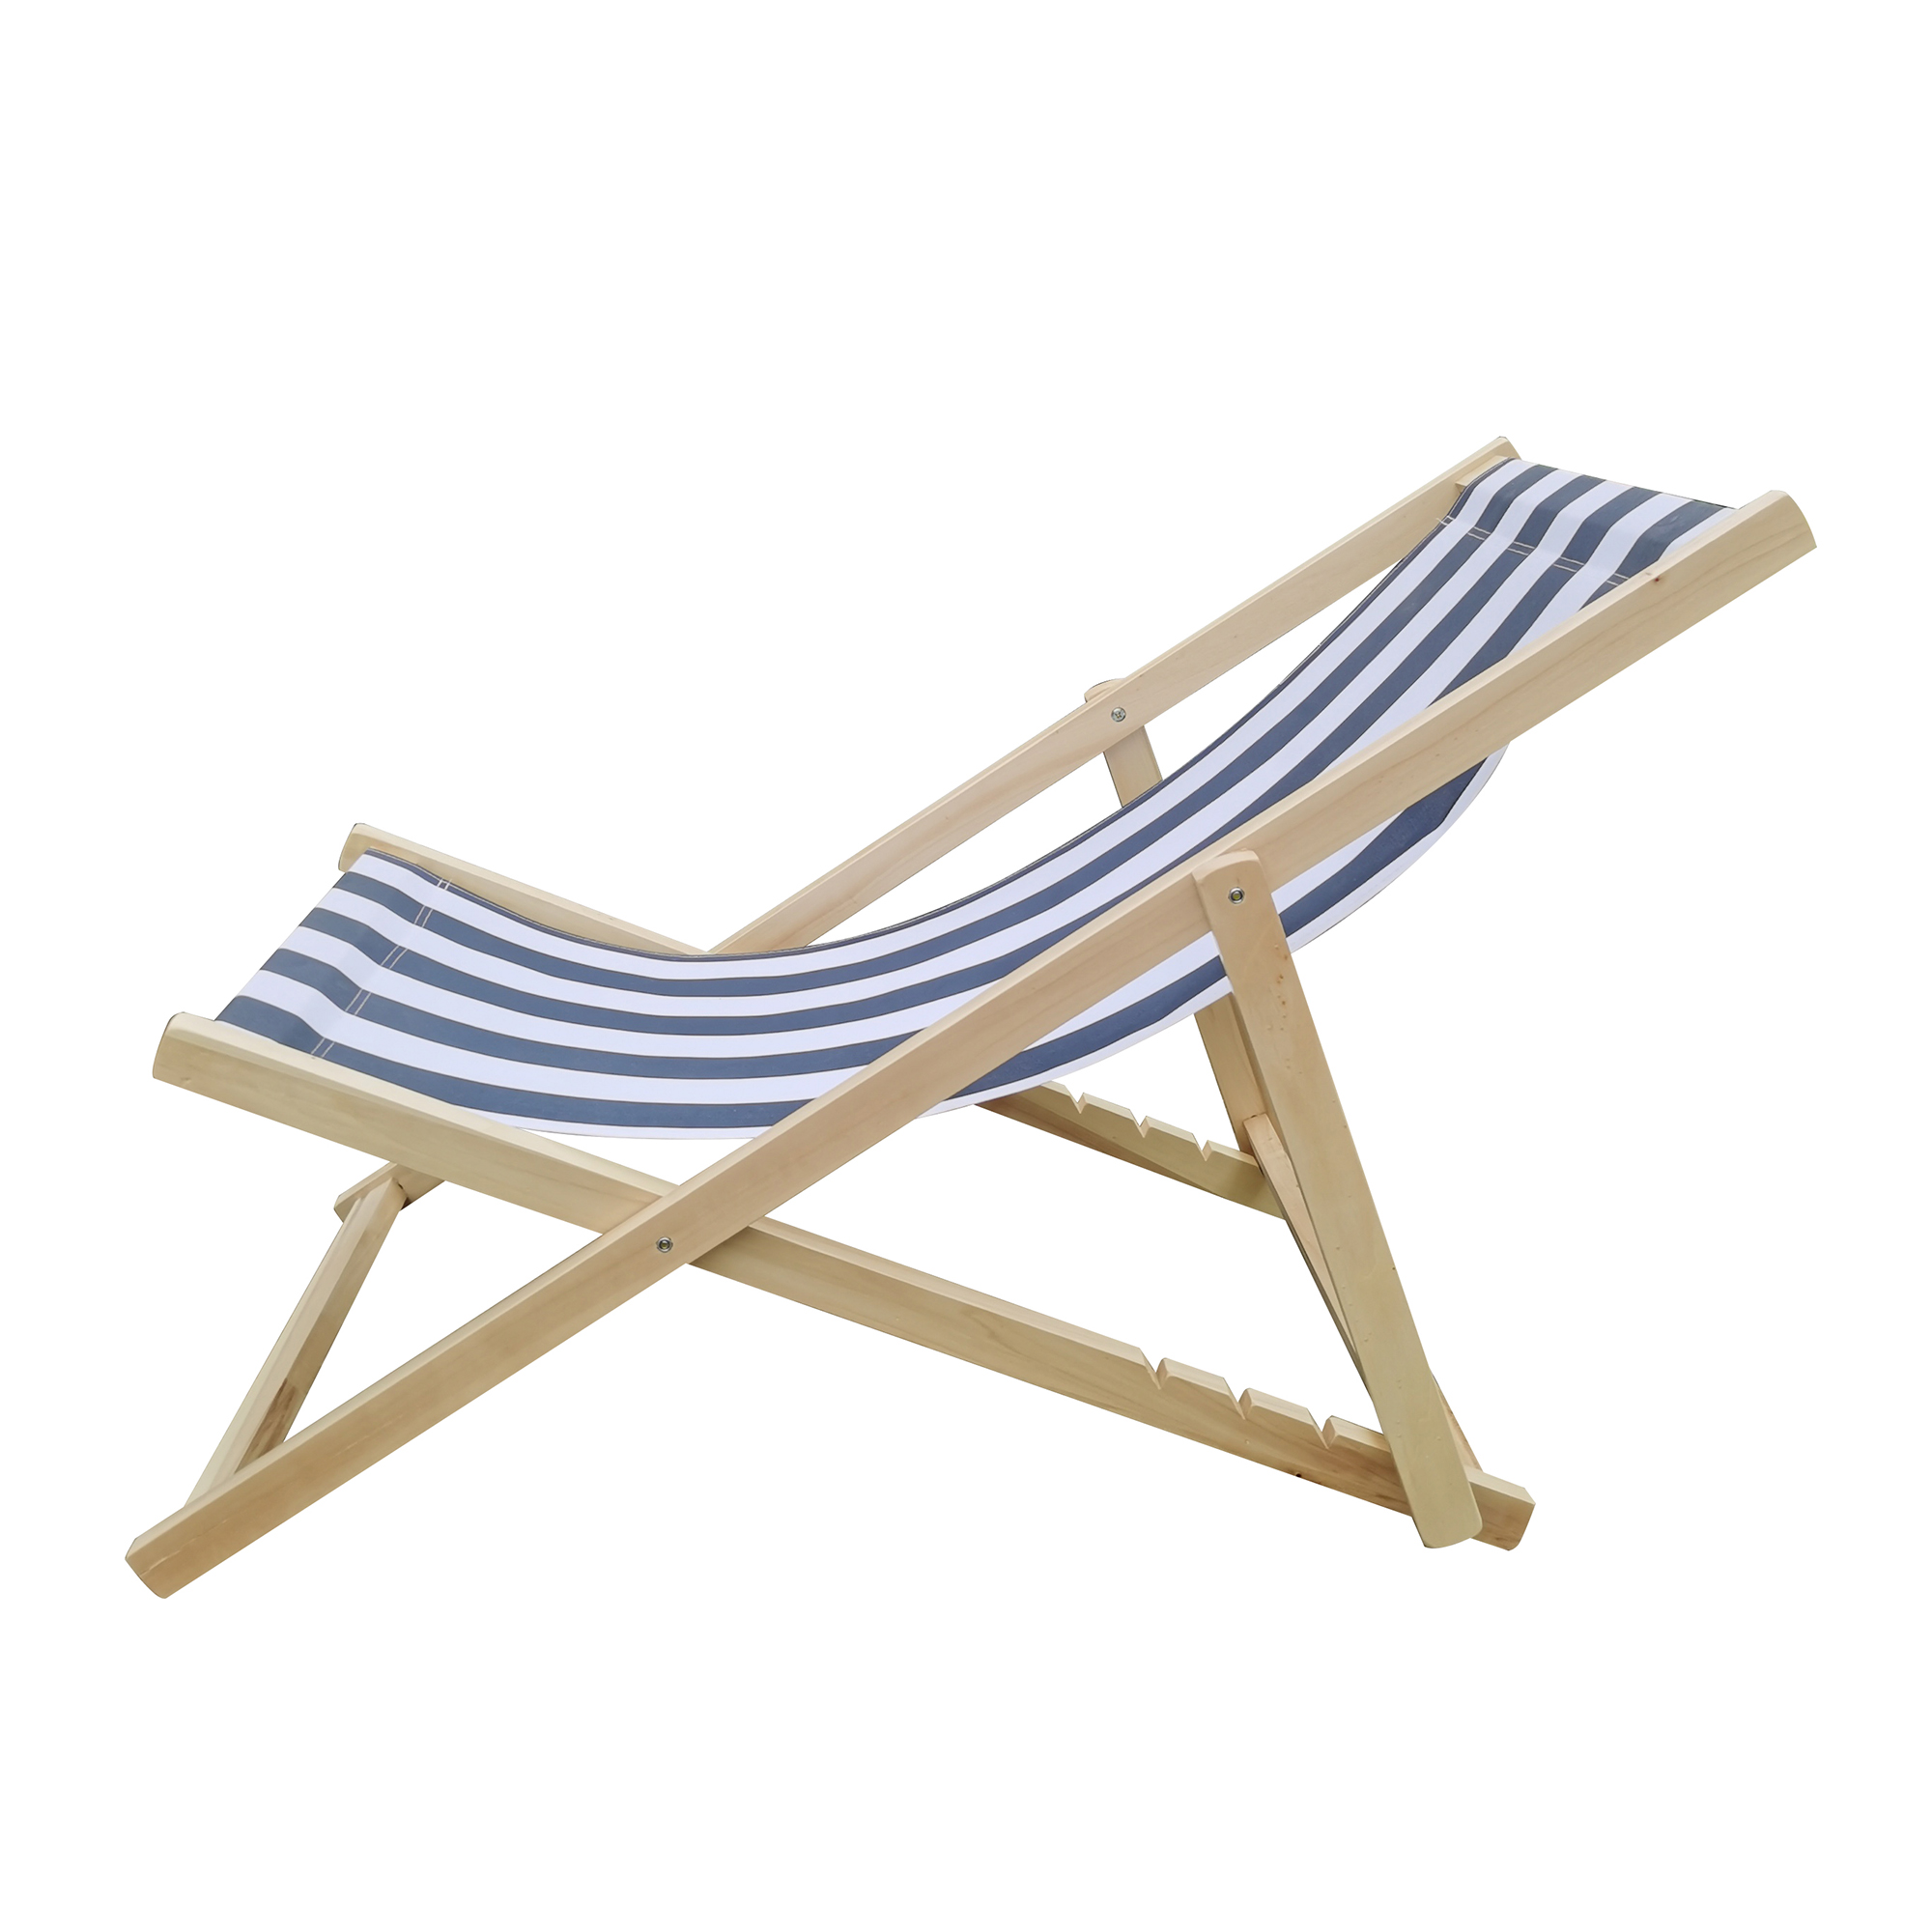 Outdoor Foldable Patio Lounge Chair, Beach Sling Chair, Outdoor Reclining Beach Chair Wooden Folding Adjustable Frame Solid Eucalyptus Wood with Blue Stripe Polyester Canvas Portable - image 3 of 7